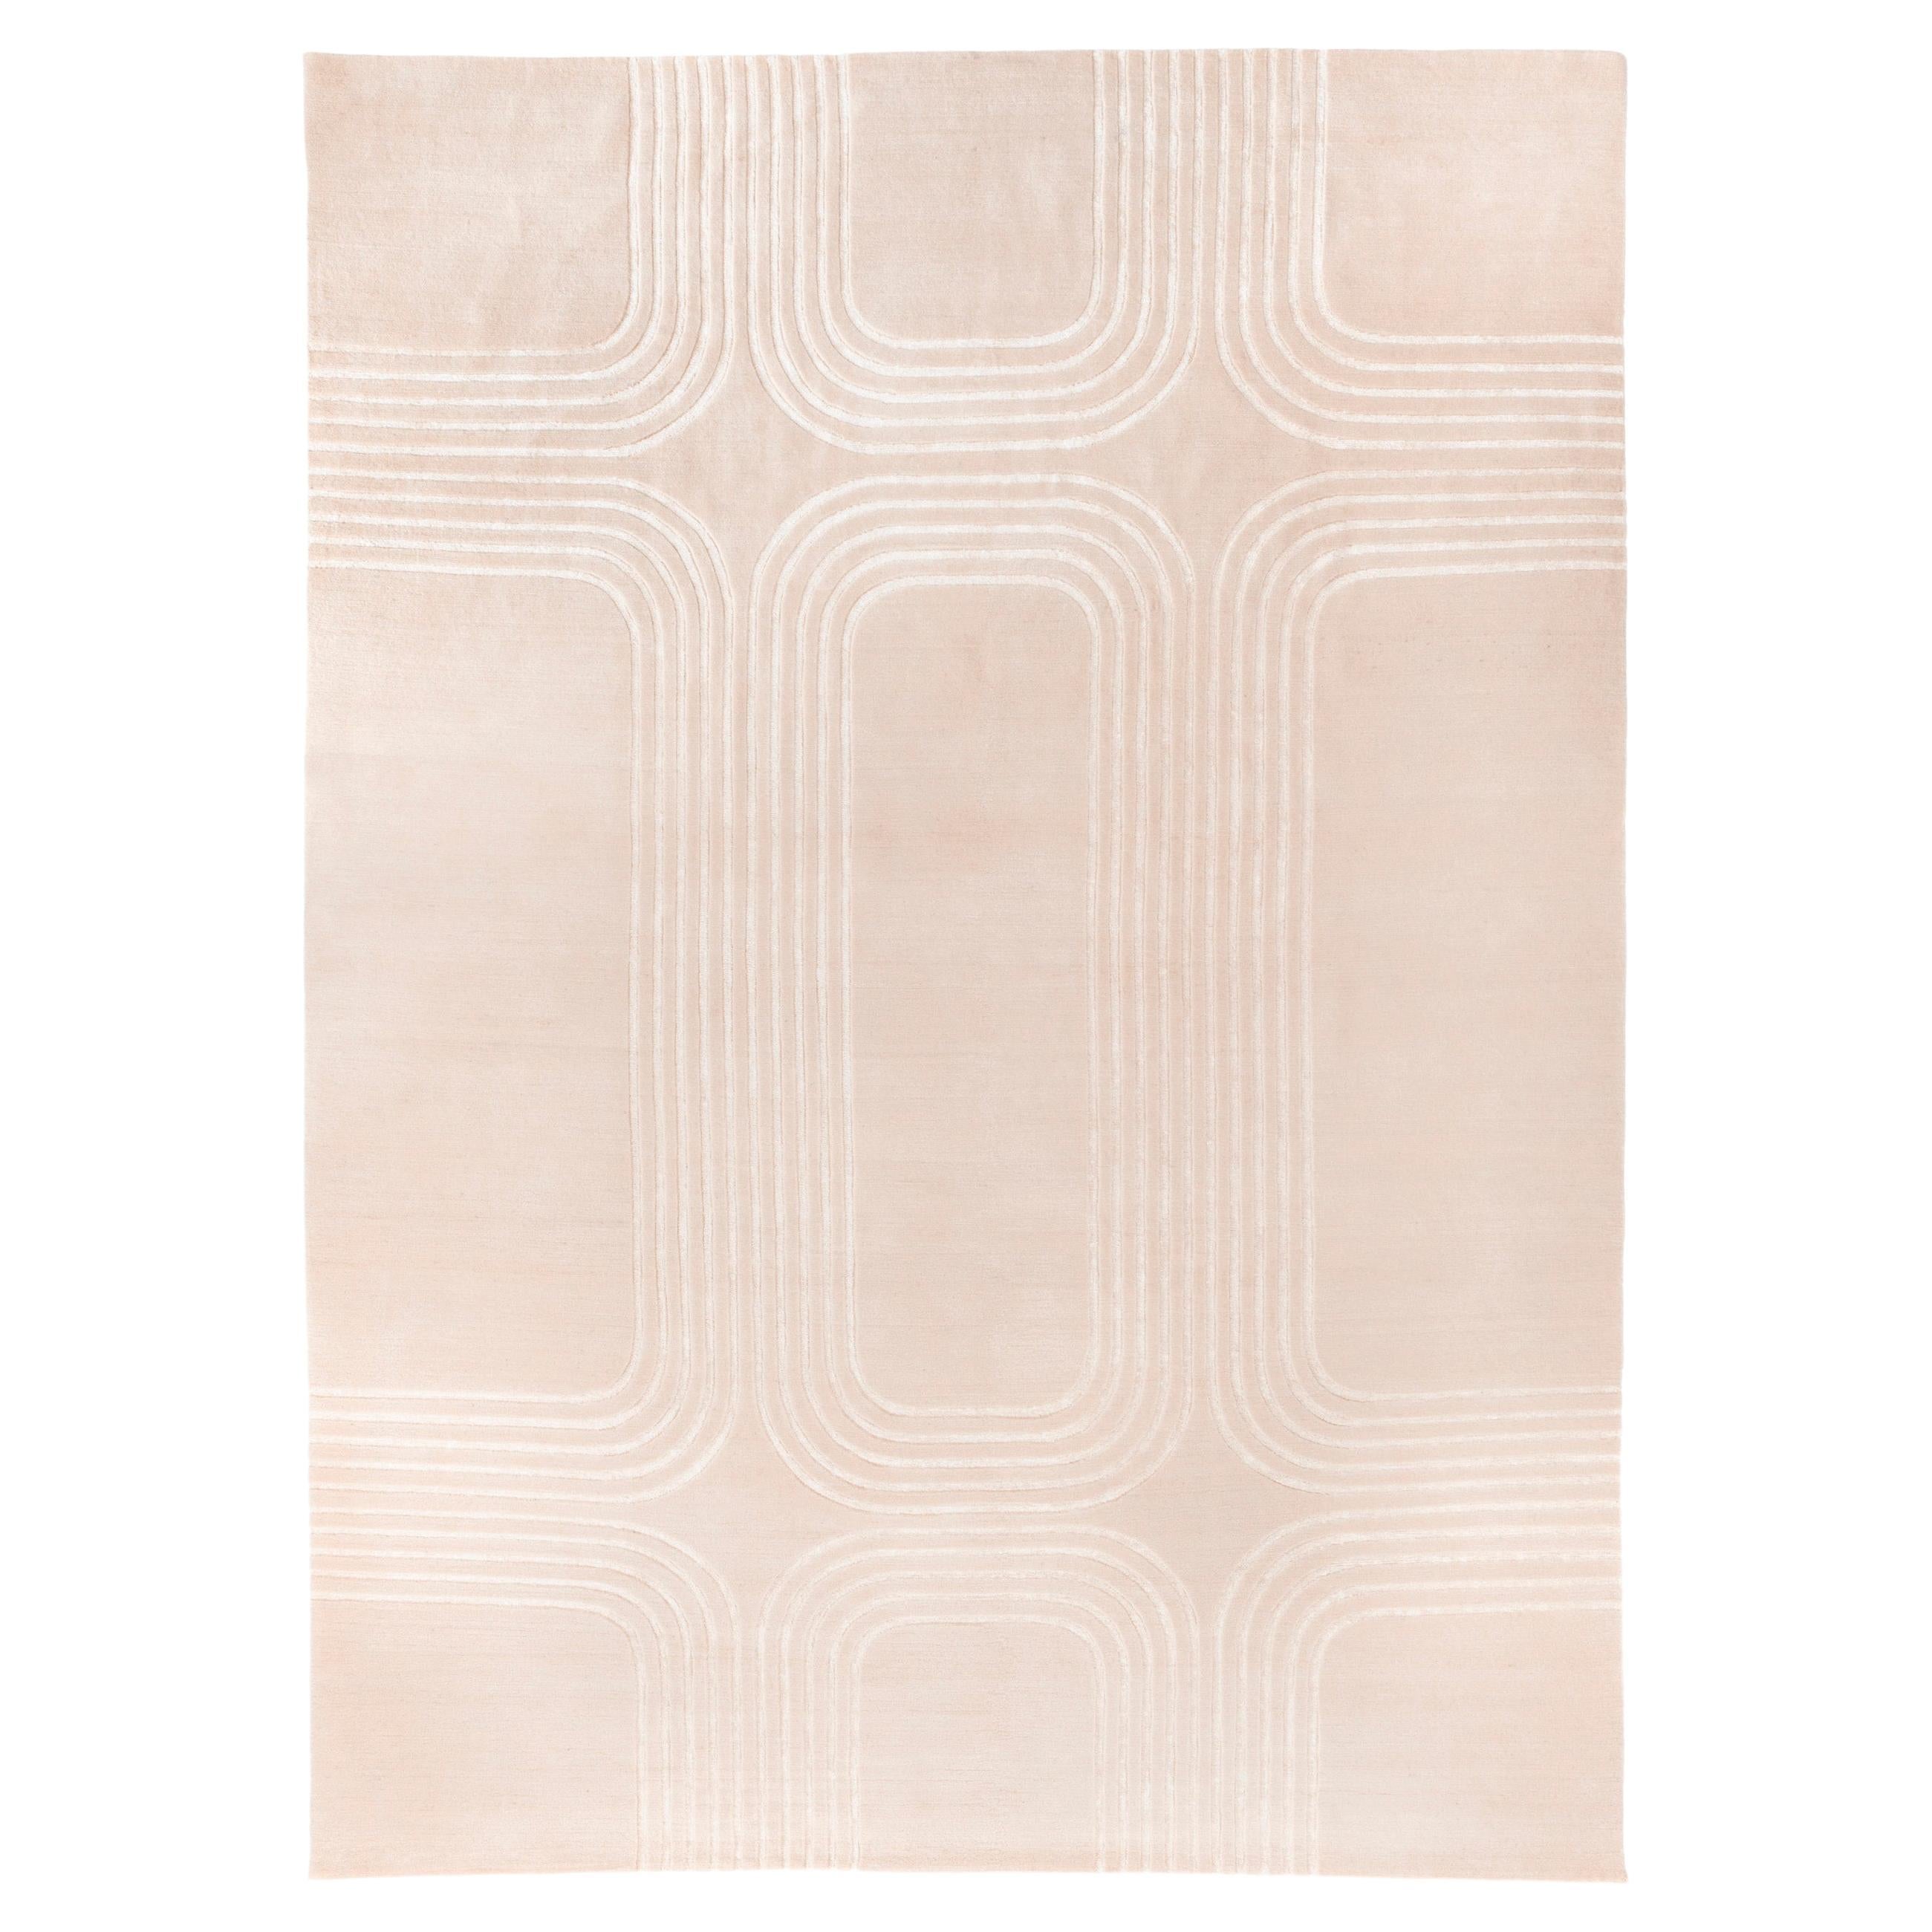 Handknotted wool rug Rilievo 04 by TIGMI
Dimensions: 350 x 250 
Materials: Wool, Linen
Available in different colors.

Tigmi Trading are a certified GoodWeave partner, a non-profit organization that works to end child labour in the rug industry